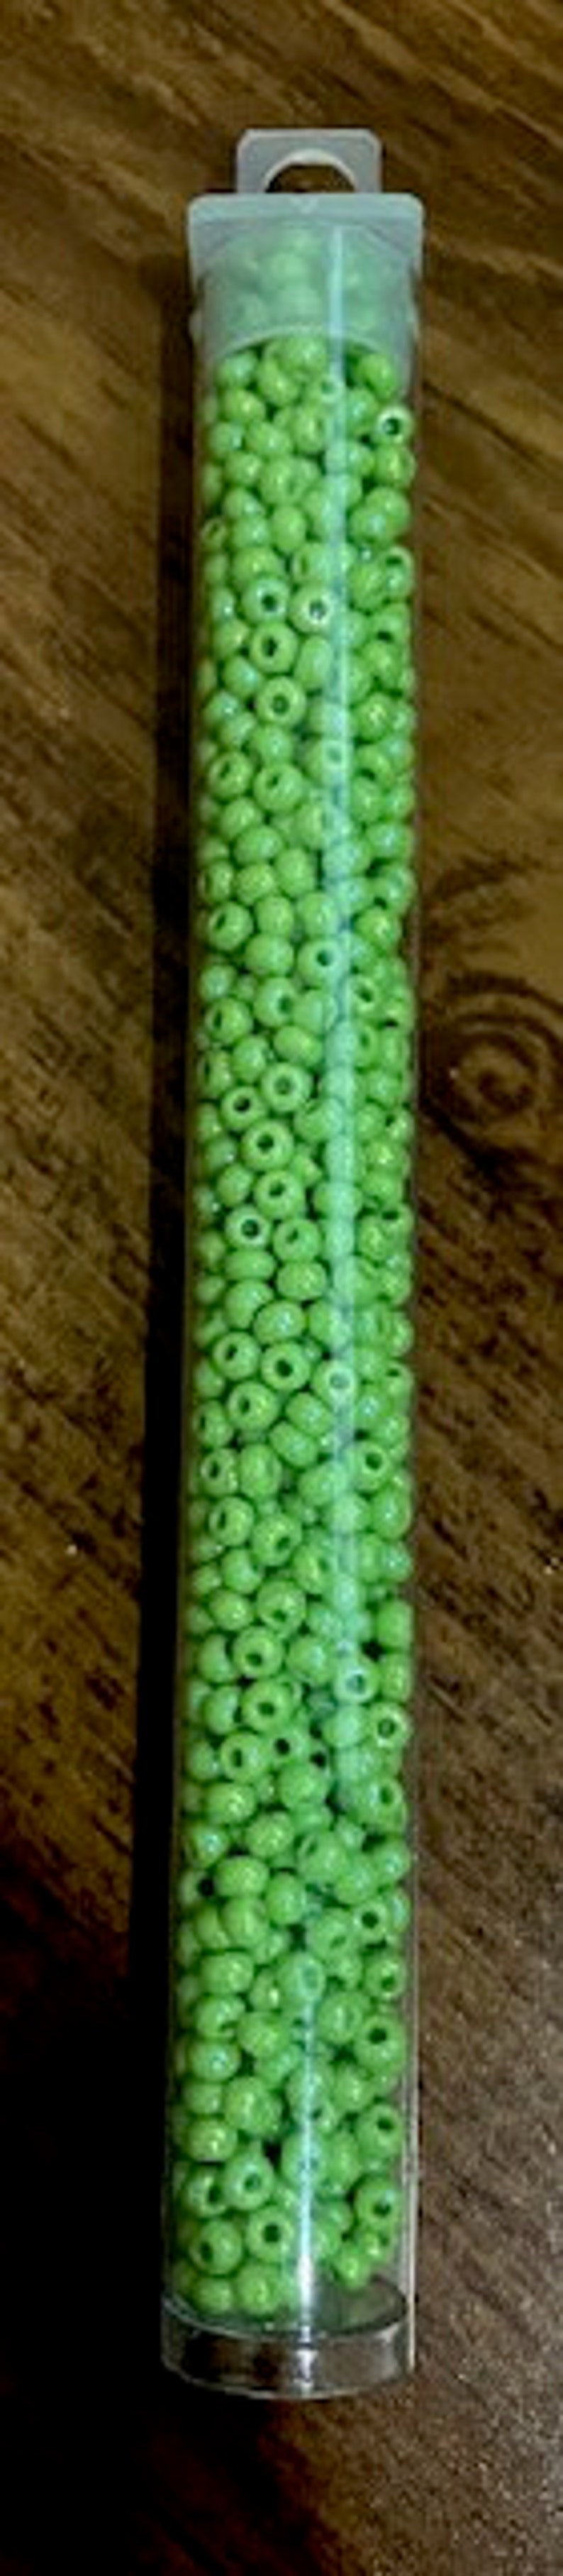 8/0 Seed Bead AB Lime Green, 22 gram/5 inch tube, Size 8 Glass Seed Bead, Opaque Lime Green Seed Bead, Julie's Bead Store, Mt Dew Green Bead image 3